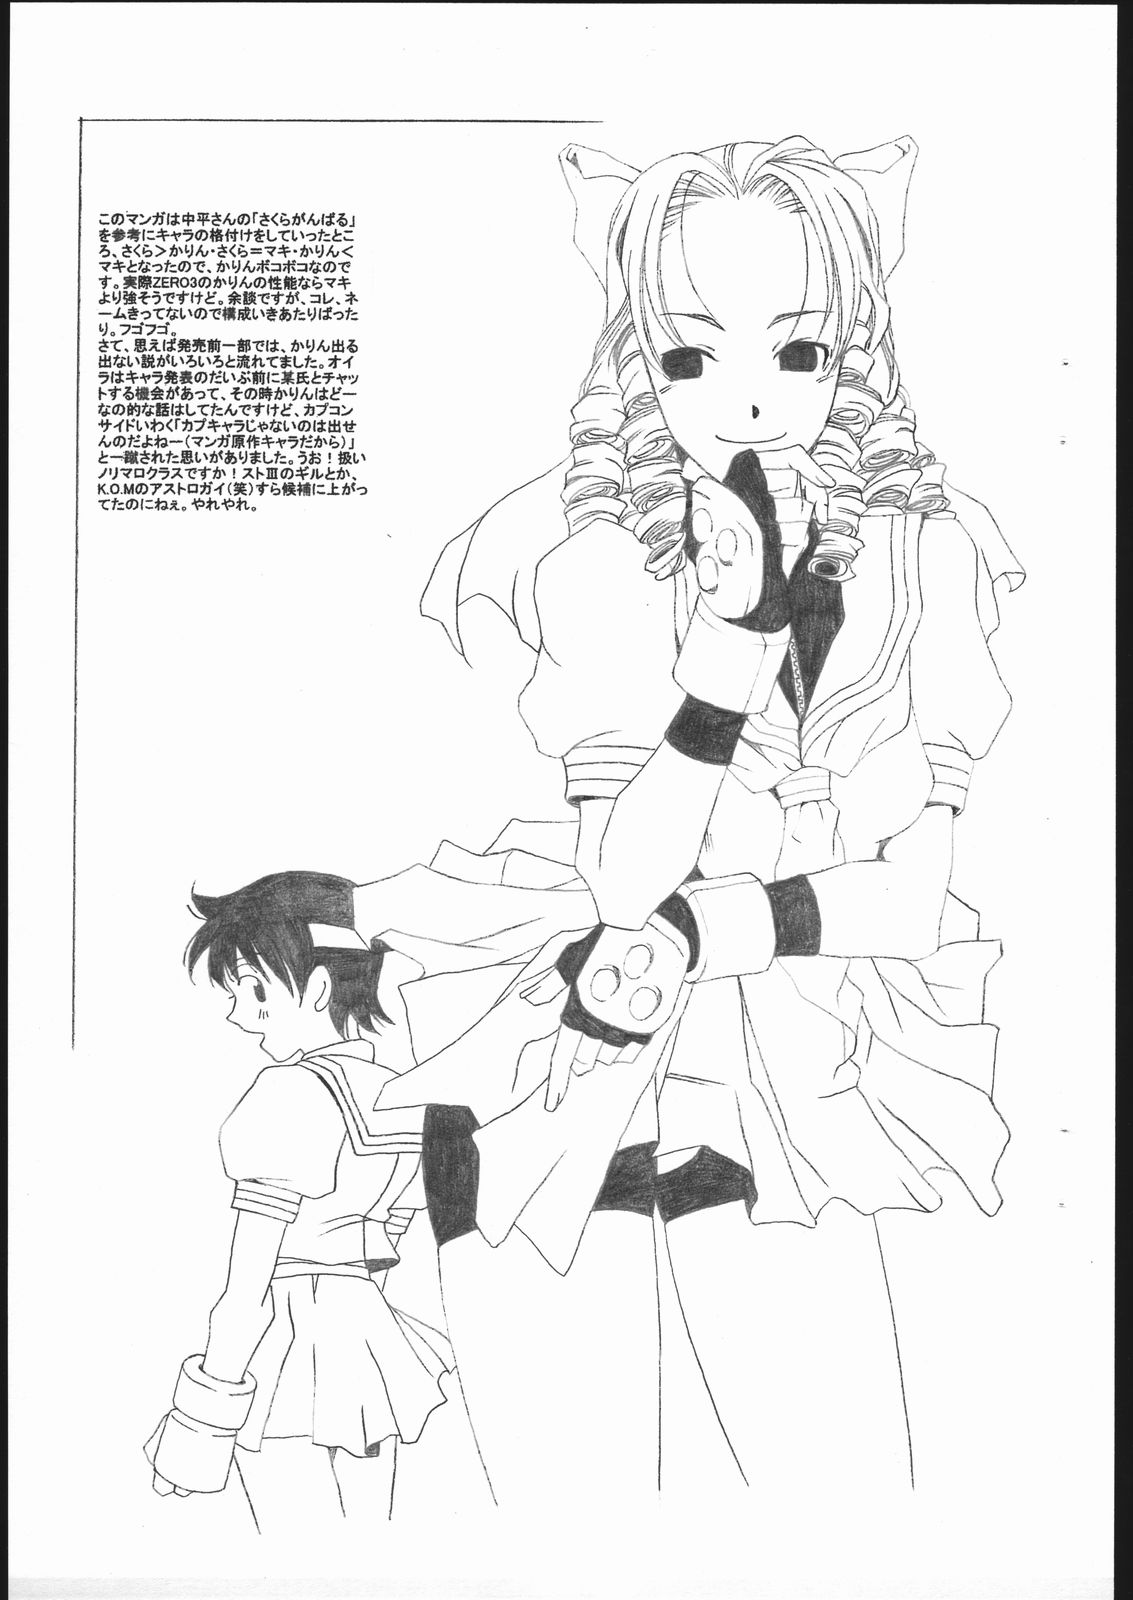 (C62) [Mushimusume Aikoukai (ASTROGUYII)] M&K Ver.2 (Street Fighter, King of Fighters) page 15 full